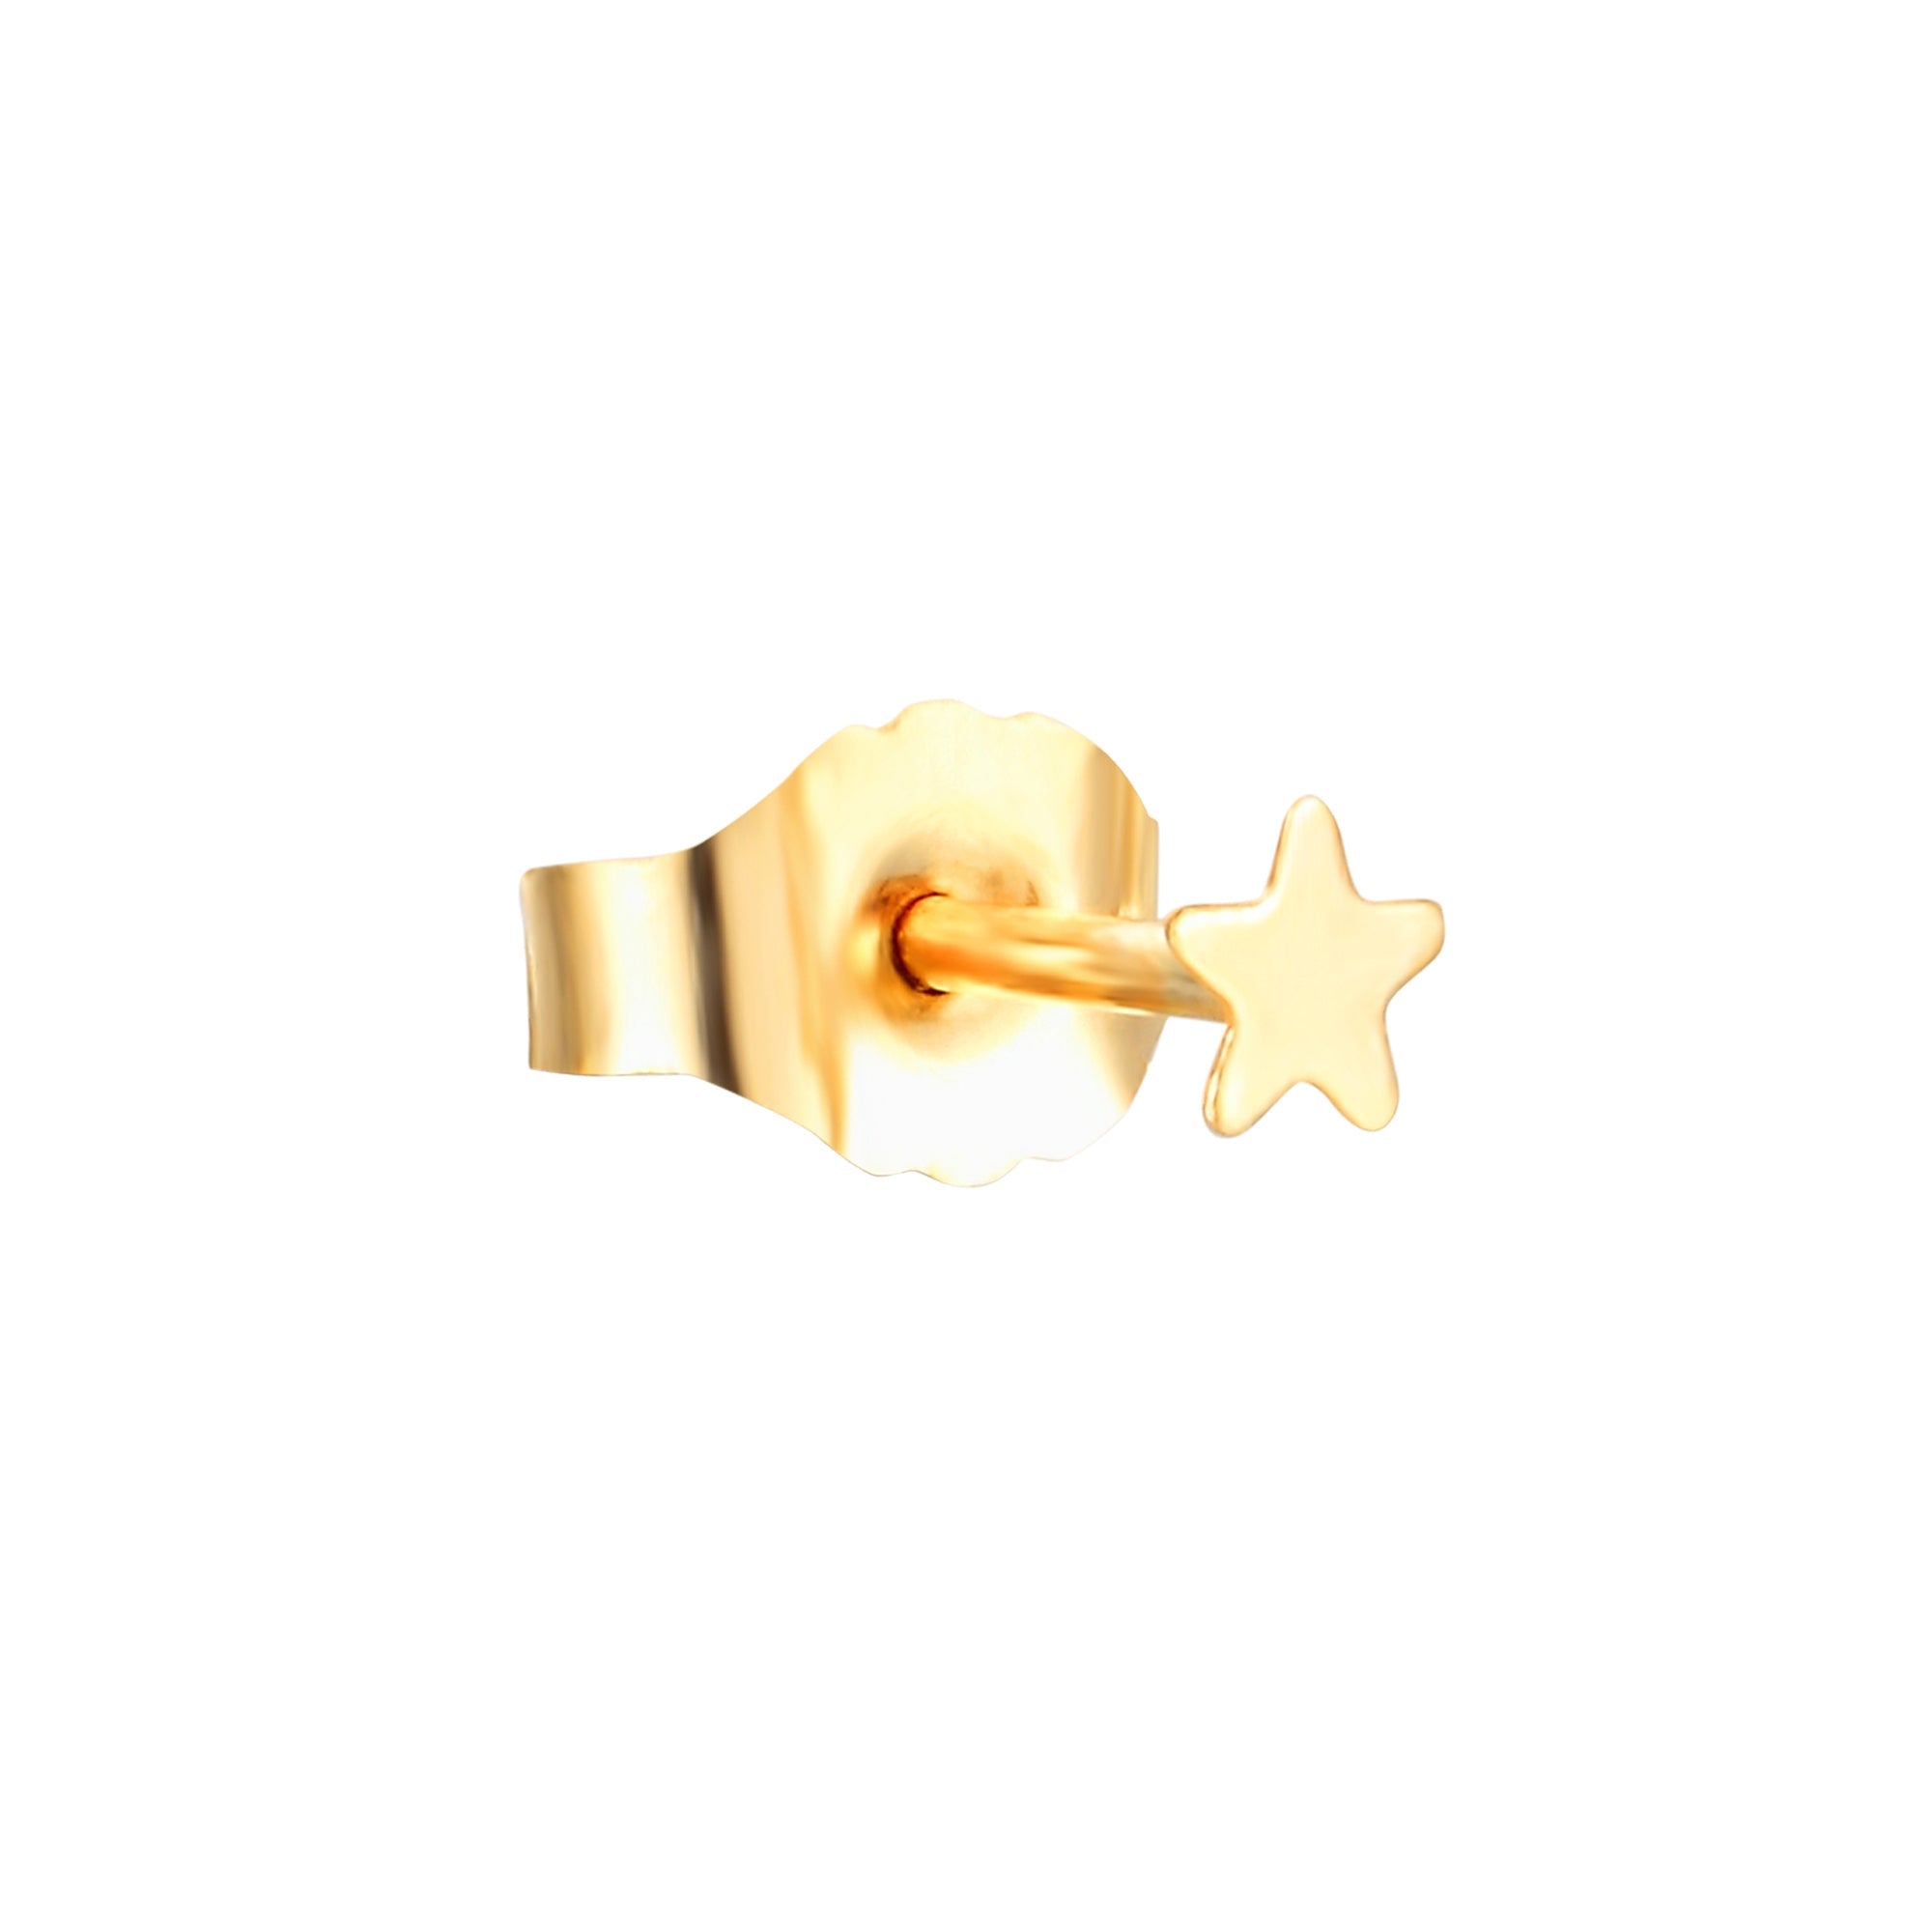 9ct Solid Gold Tiny Star Studs